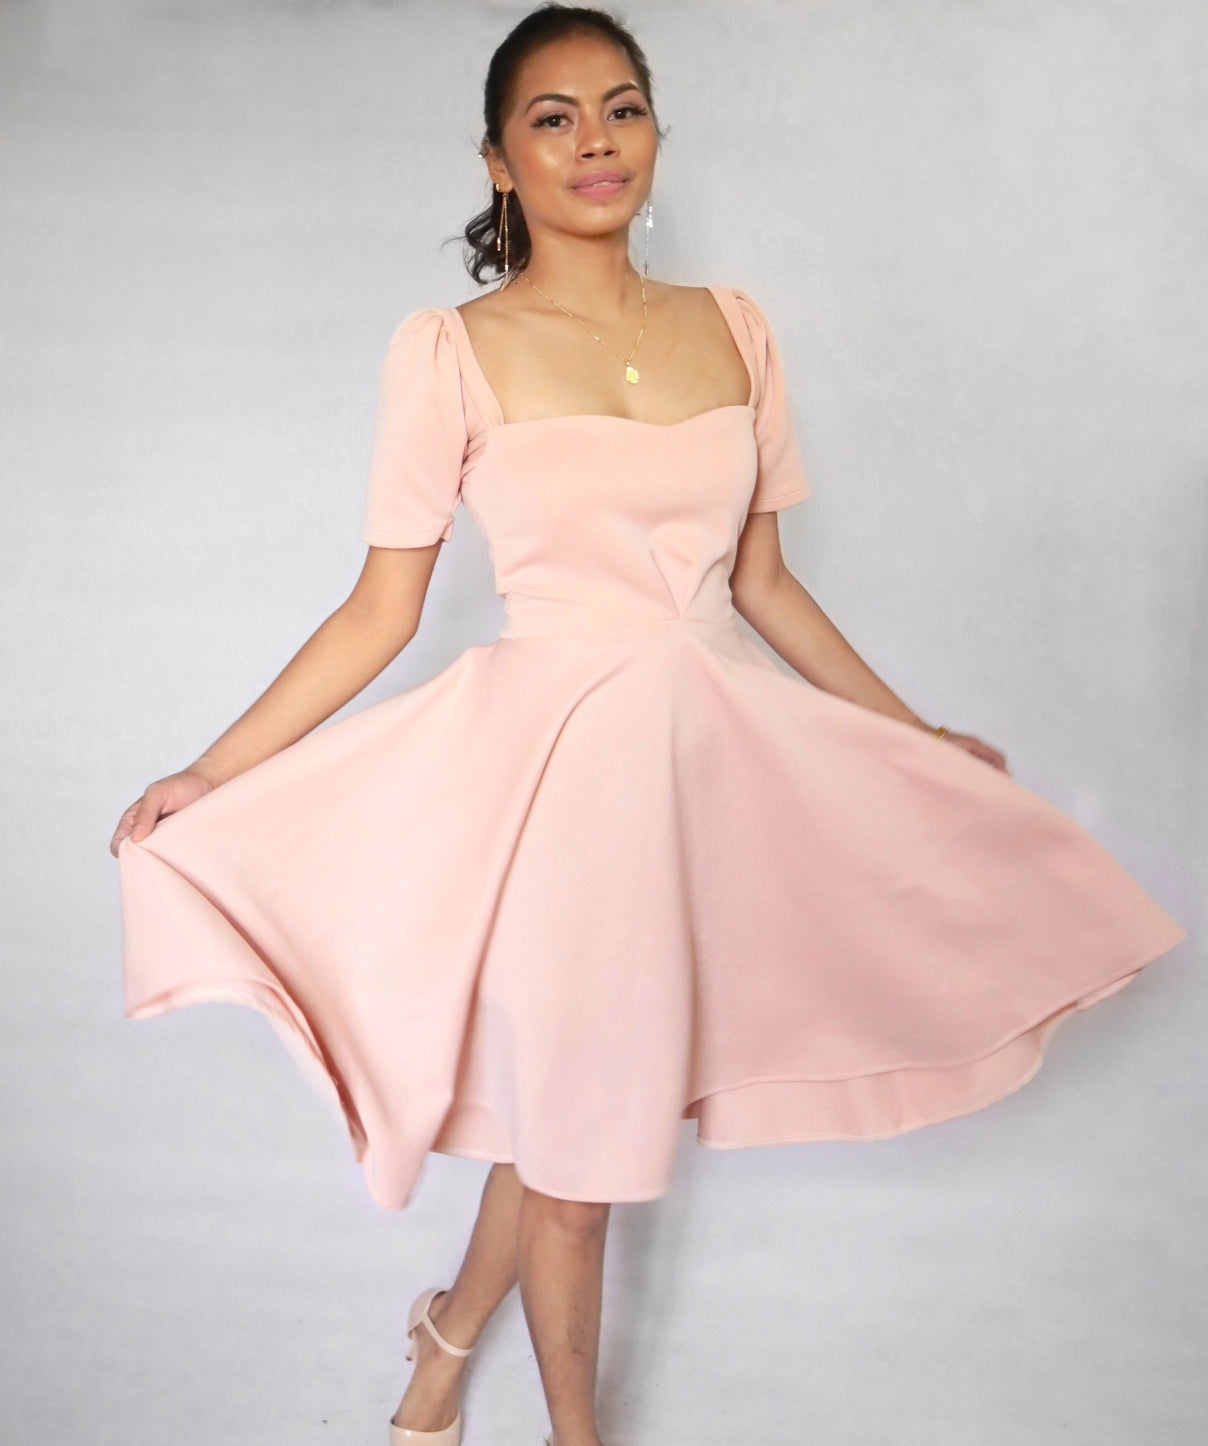 Puff Sleeved Dress in Dusty Pink